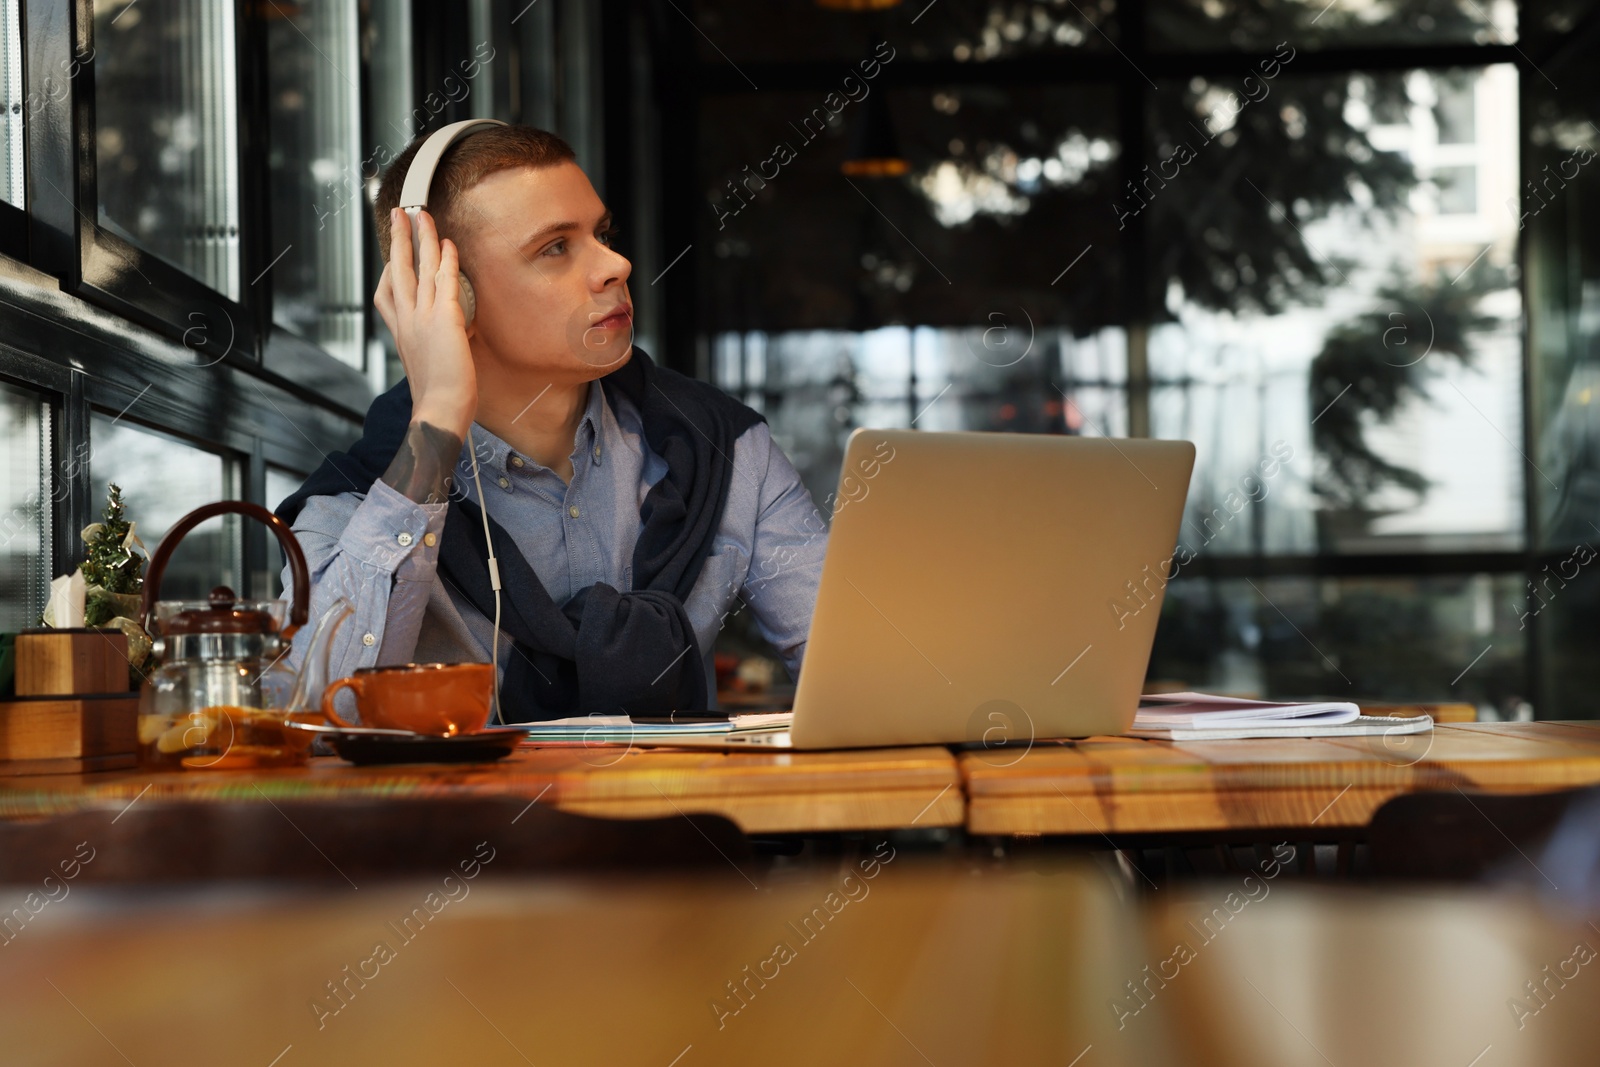 Photo of Young male student with laptop and headphones studying at table in cafe